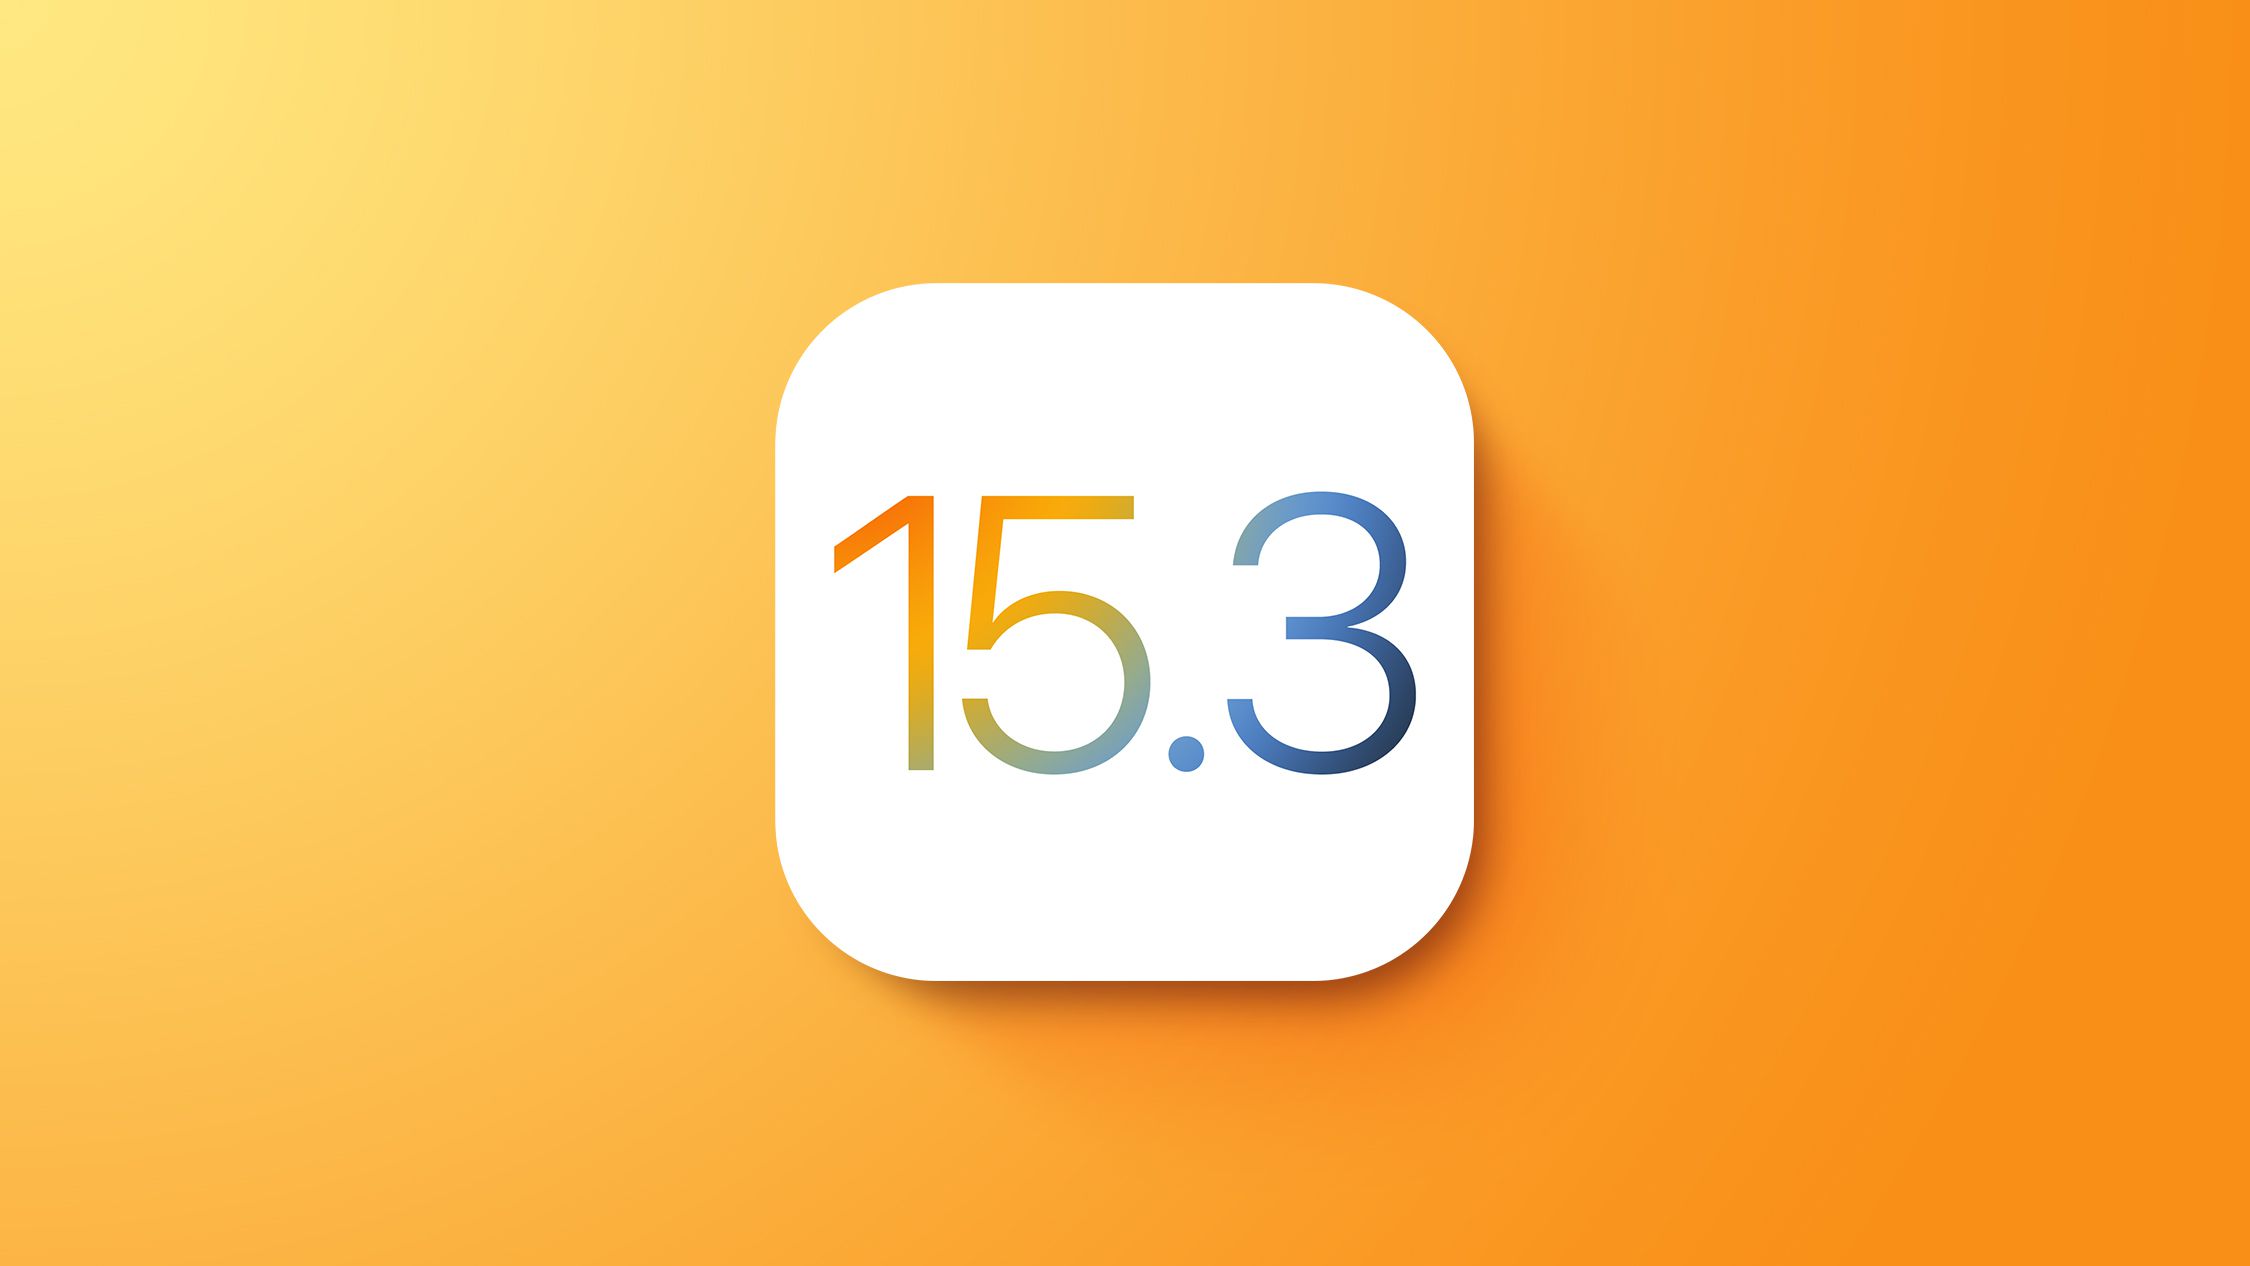 Apple Stops Signing iOS 15.3 Following iOS 15.3.1 Release, Downgrading No Longer..